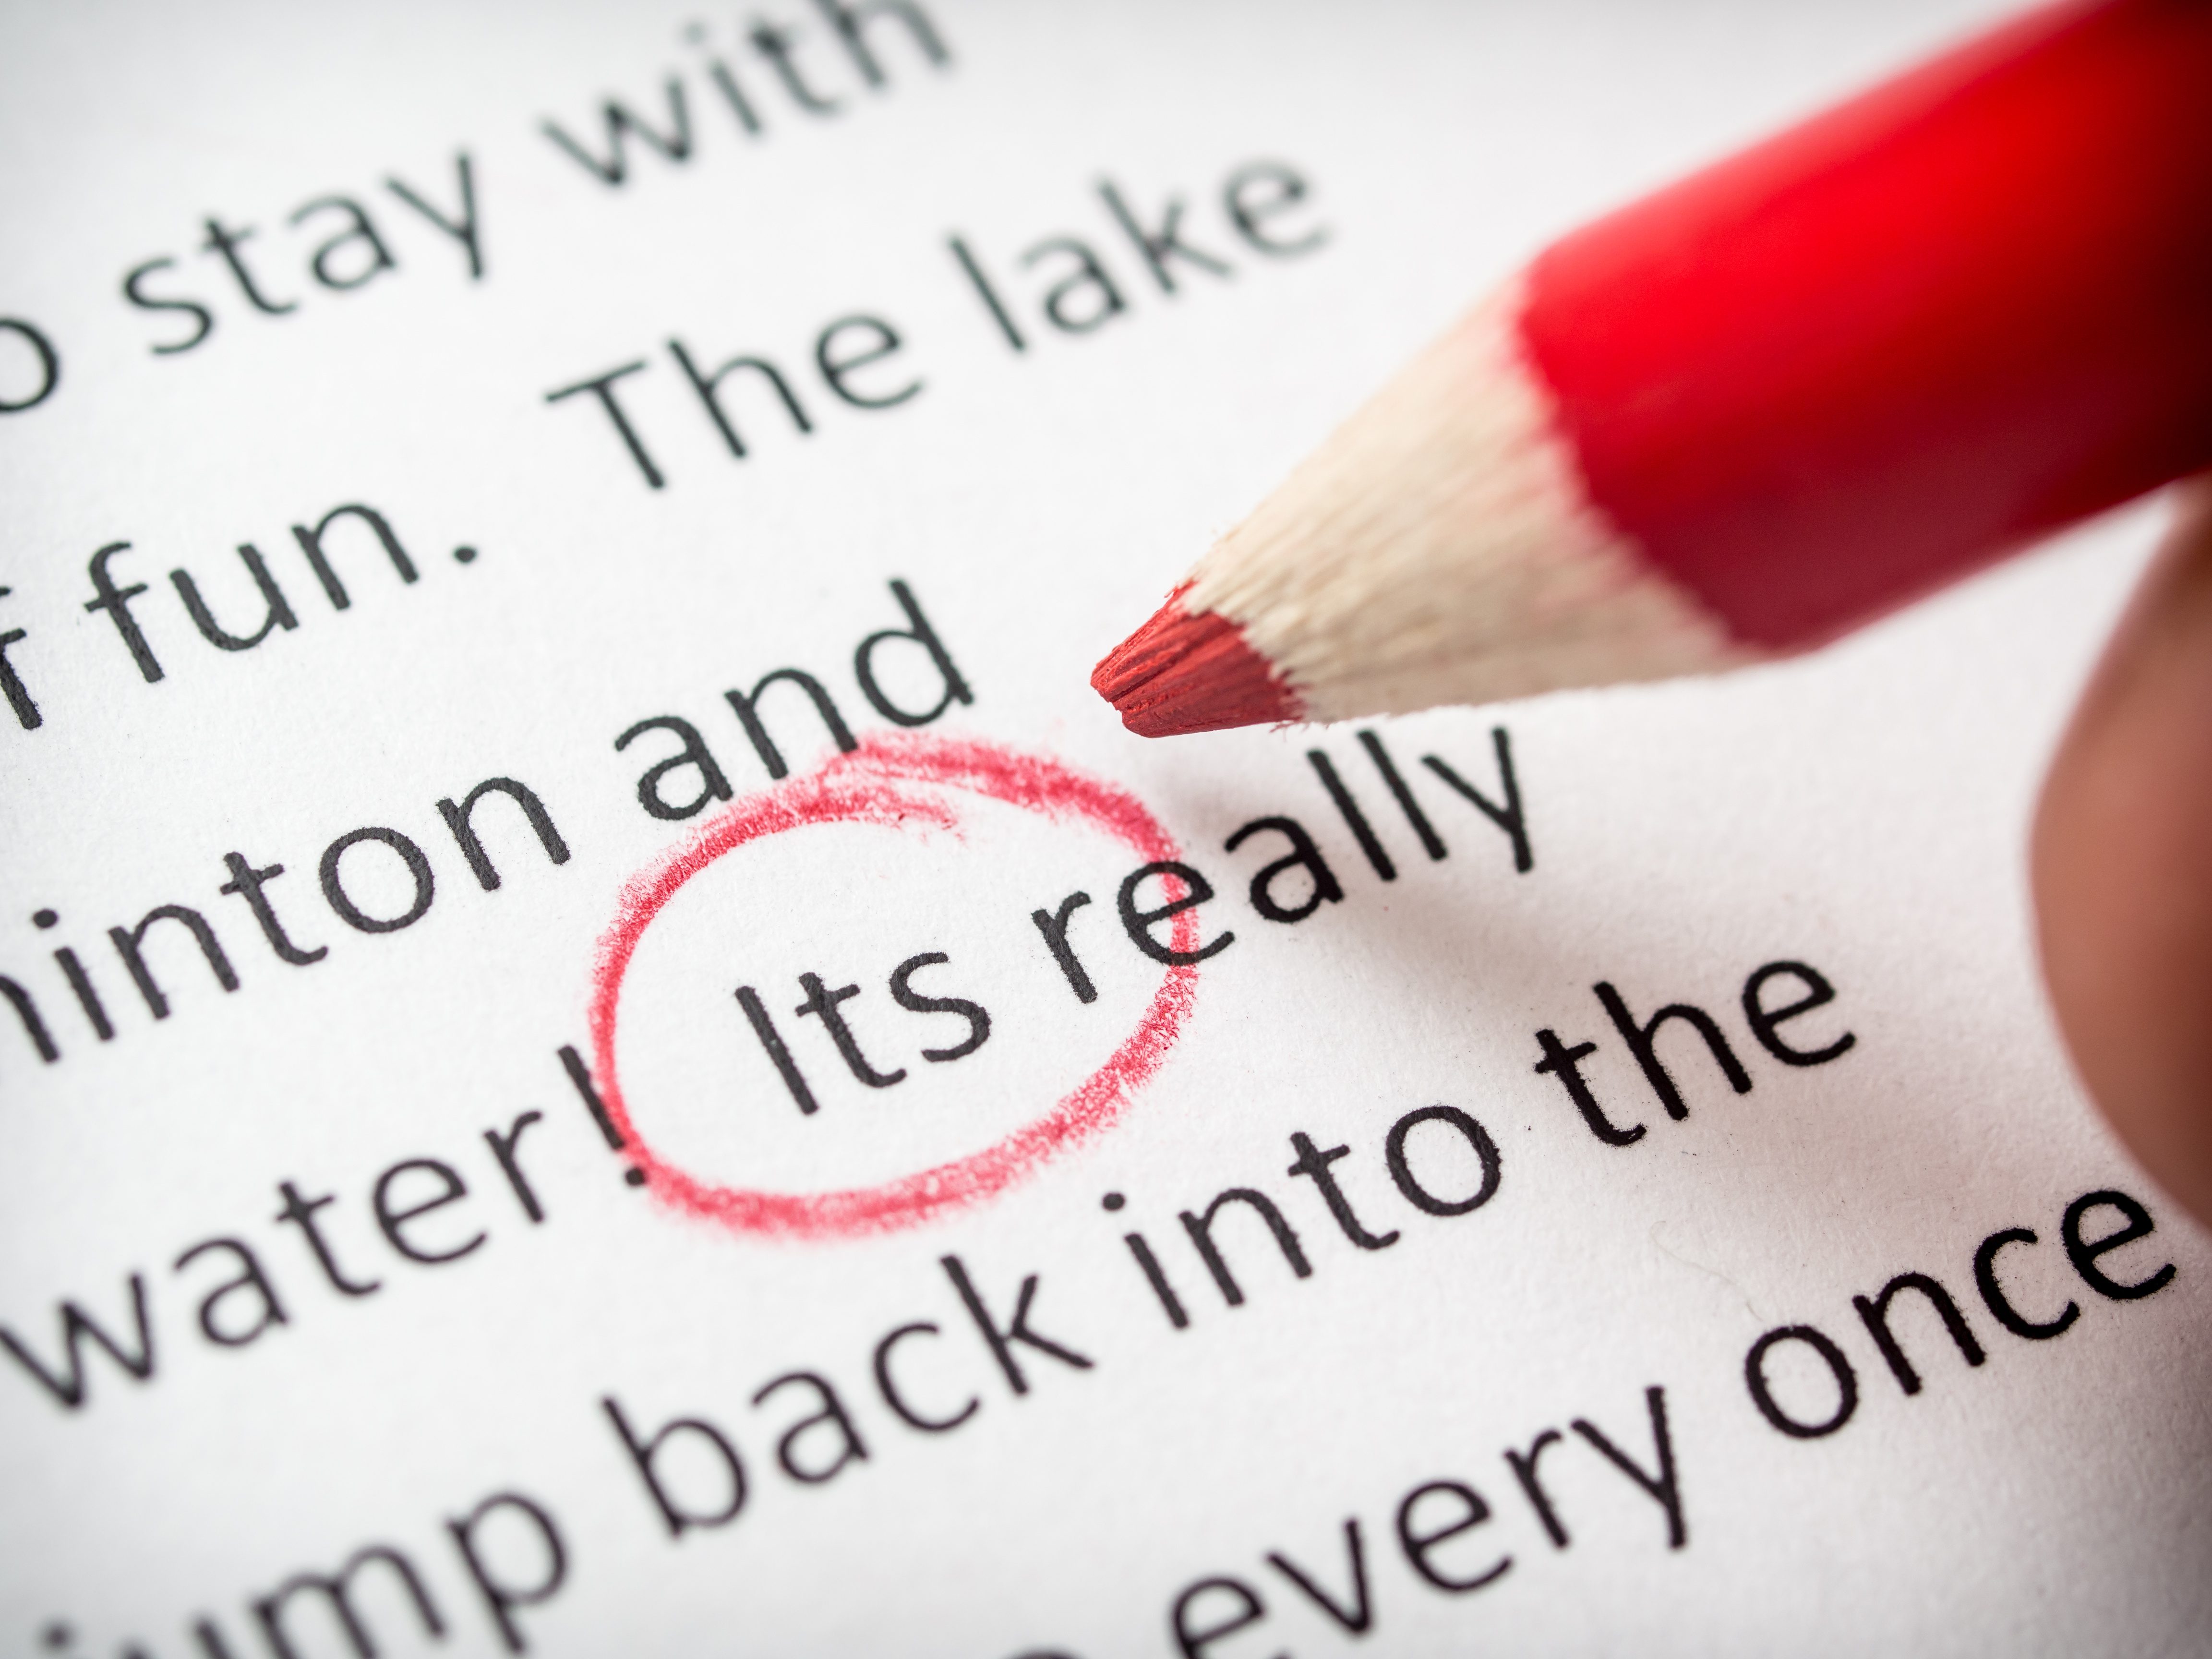 editing and proofreading services meaning